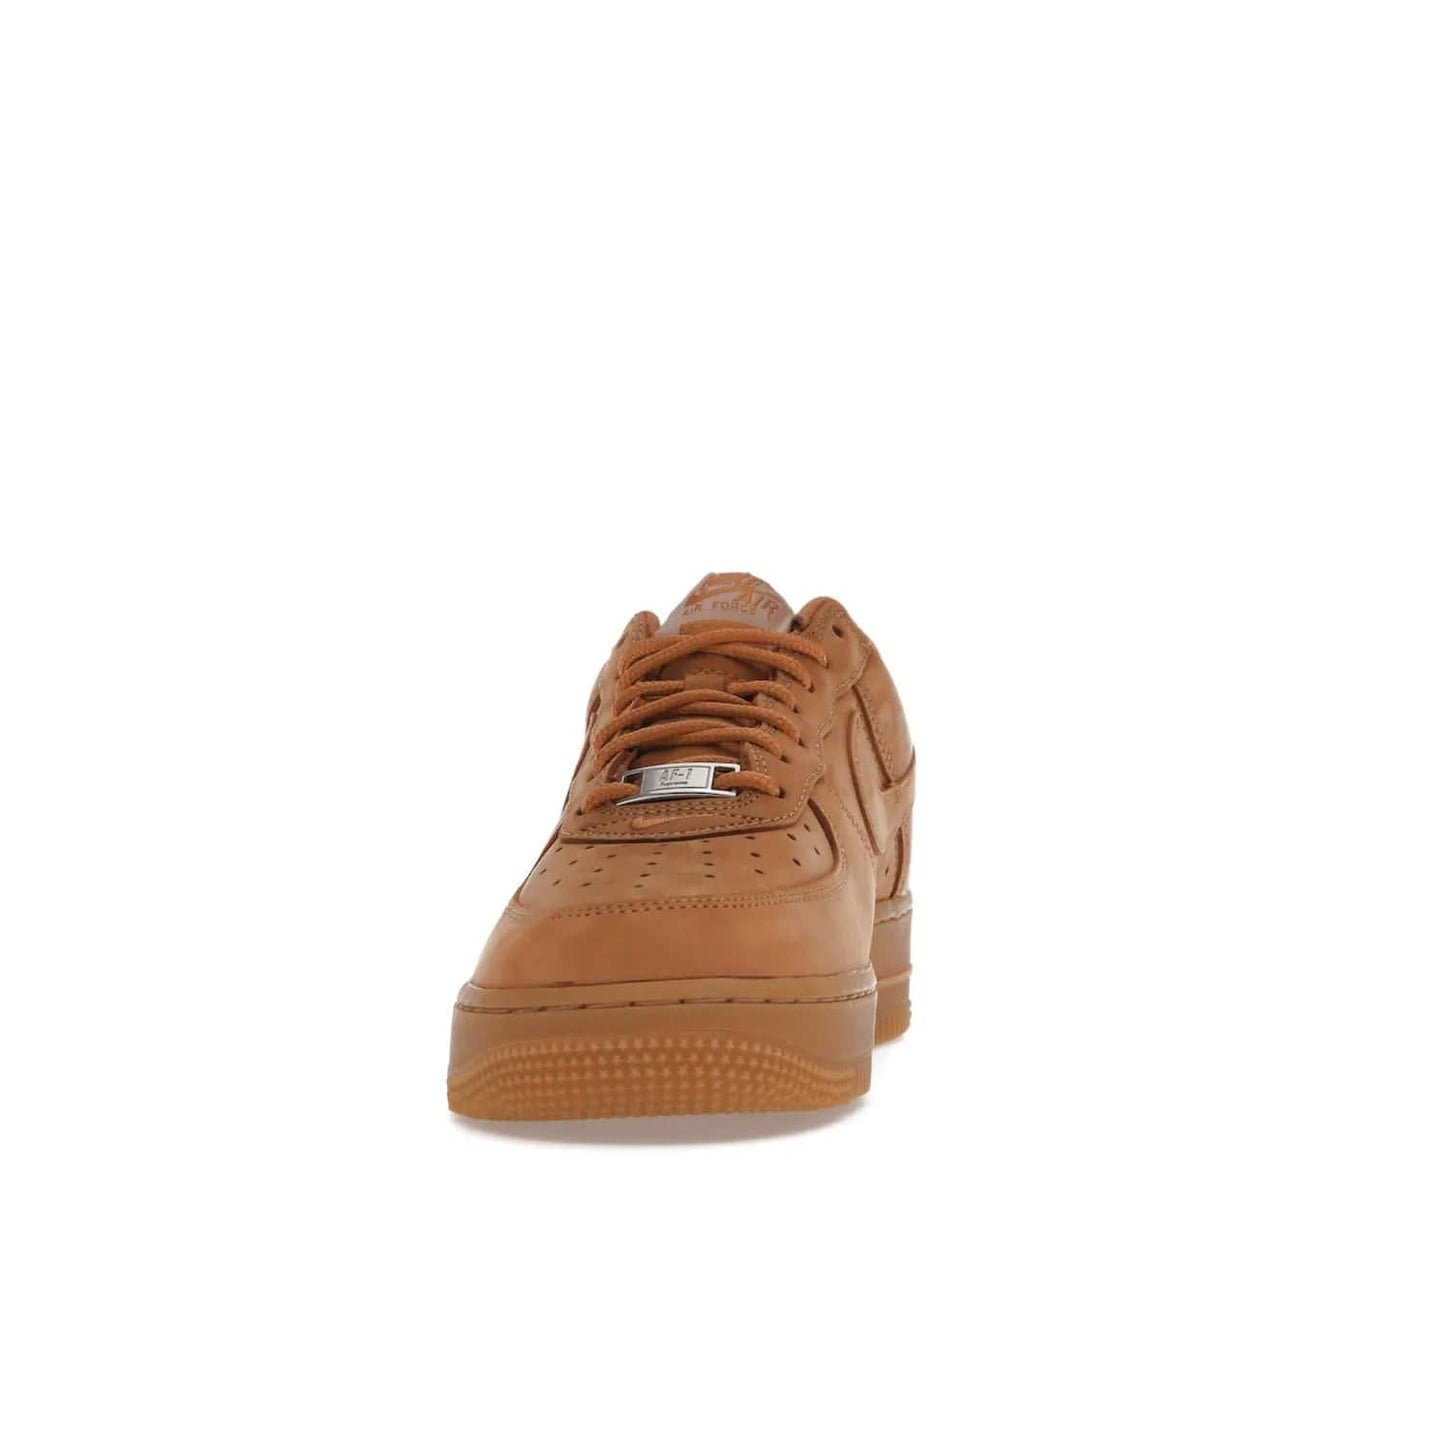 Nike Air Force 1 Low SP Supreme Wheat - Image 11 - Only at www.BallersClubKickz.com - A luxe Flax Durabuck upper and Supreme Box Logo insignias on the lateral heels make the Nike Air Force 1 Low SP Supreme Wheat a stylish lifestyle shoe. Matching Flax Air sole adds a classic touch to this collaboration between Nike and Supreme. Make a statement with this edition of the classic Air Force 1 Low.